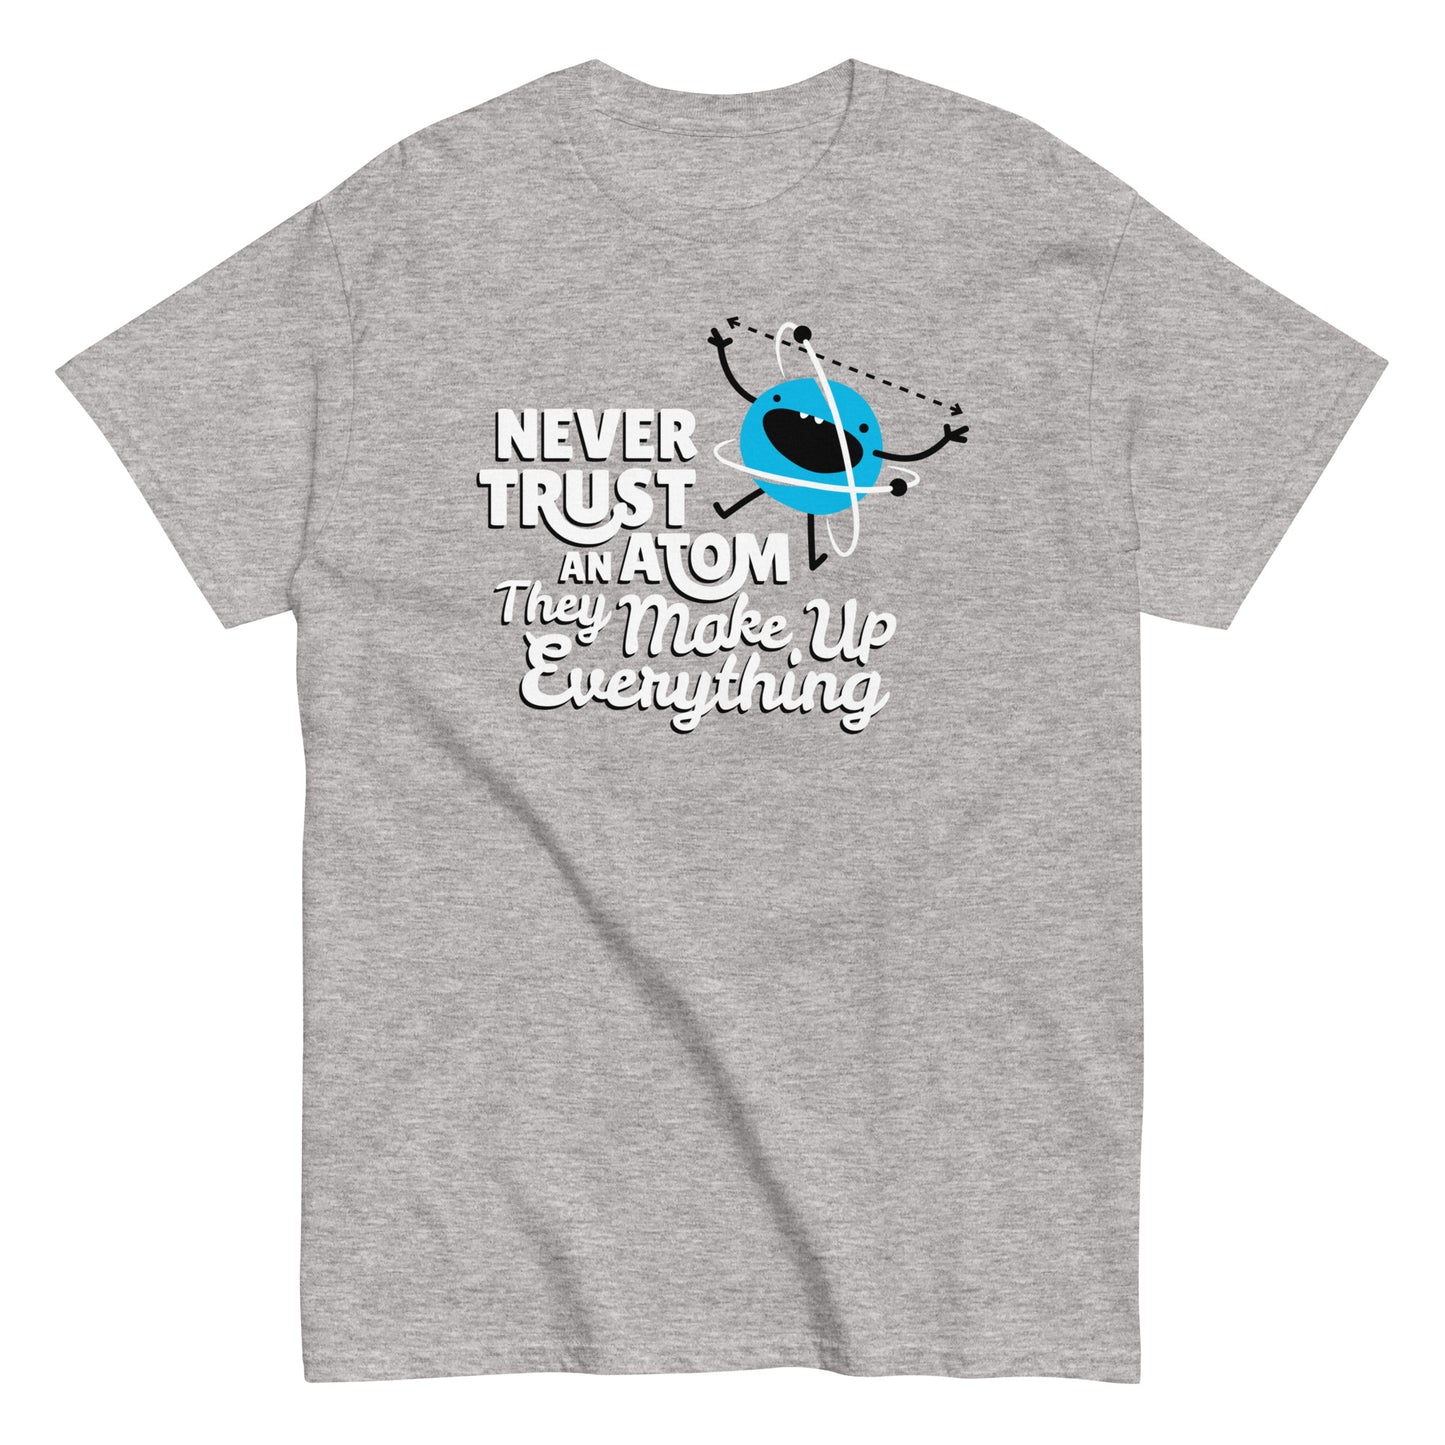 Never Trust An Atom, They Make Up Everything Men's Classic Tee